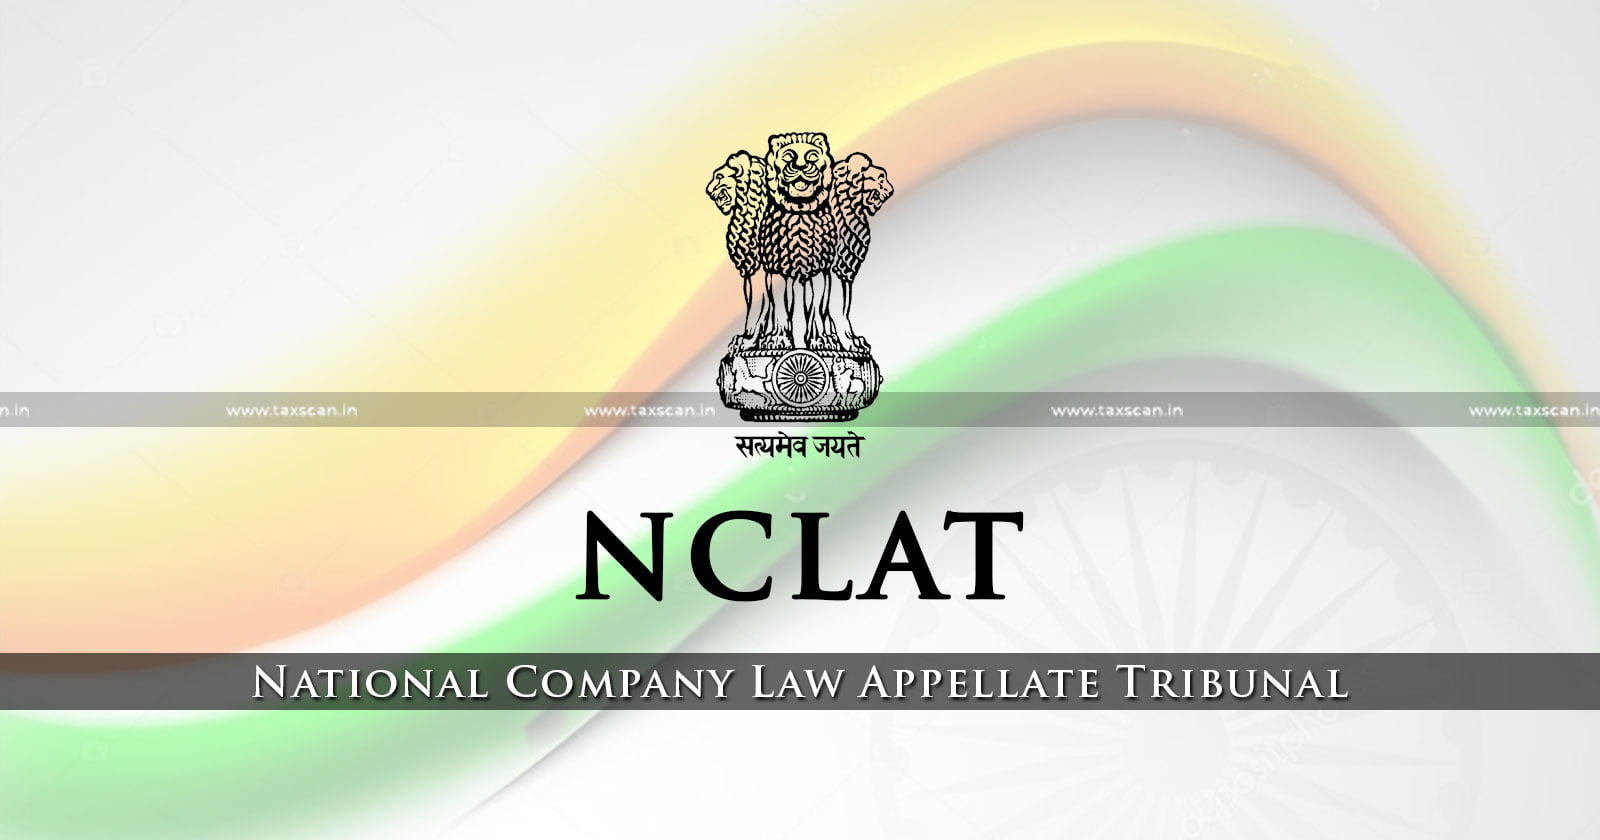 NCLAT Delhi - National Company Law Tribunal - NCLT jurisdiction on trademark issues - NCLAT ruling on NCLT's authority - Taxscan